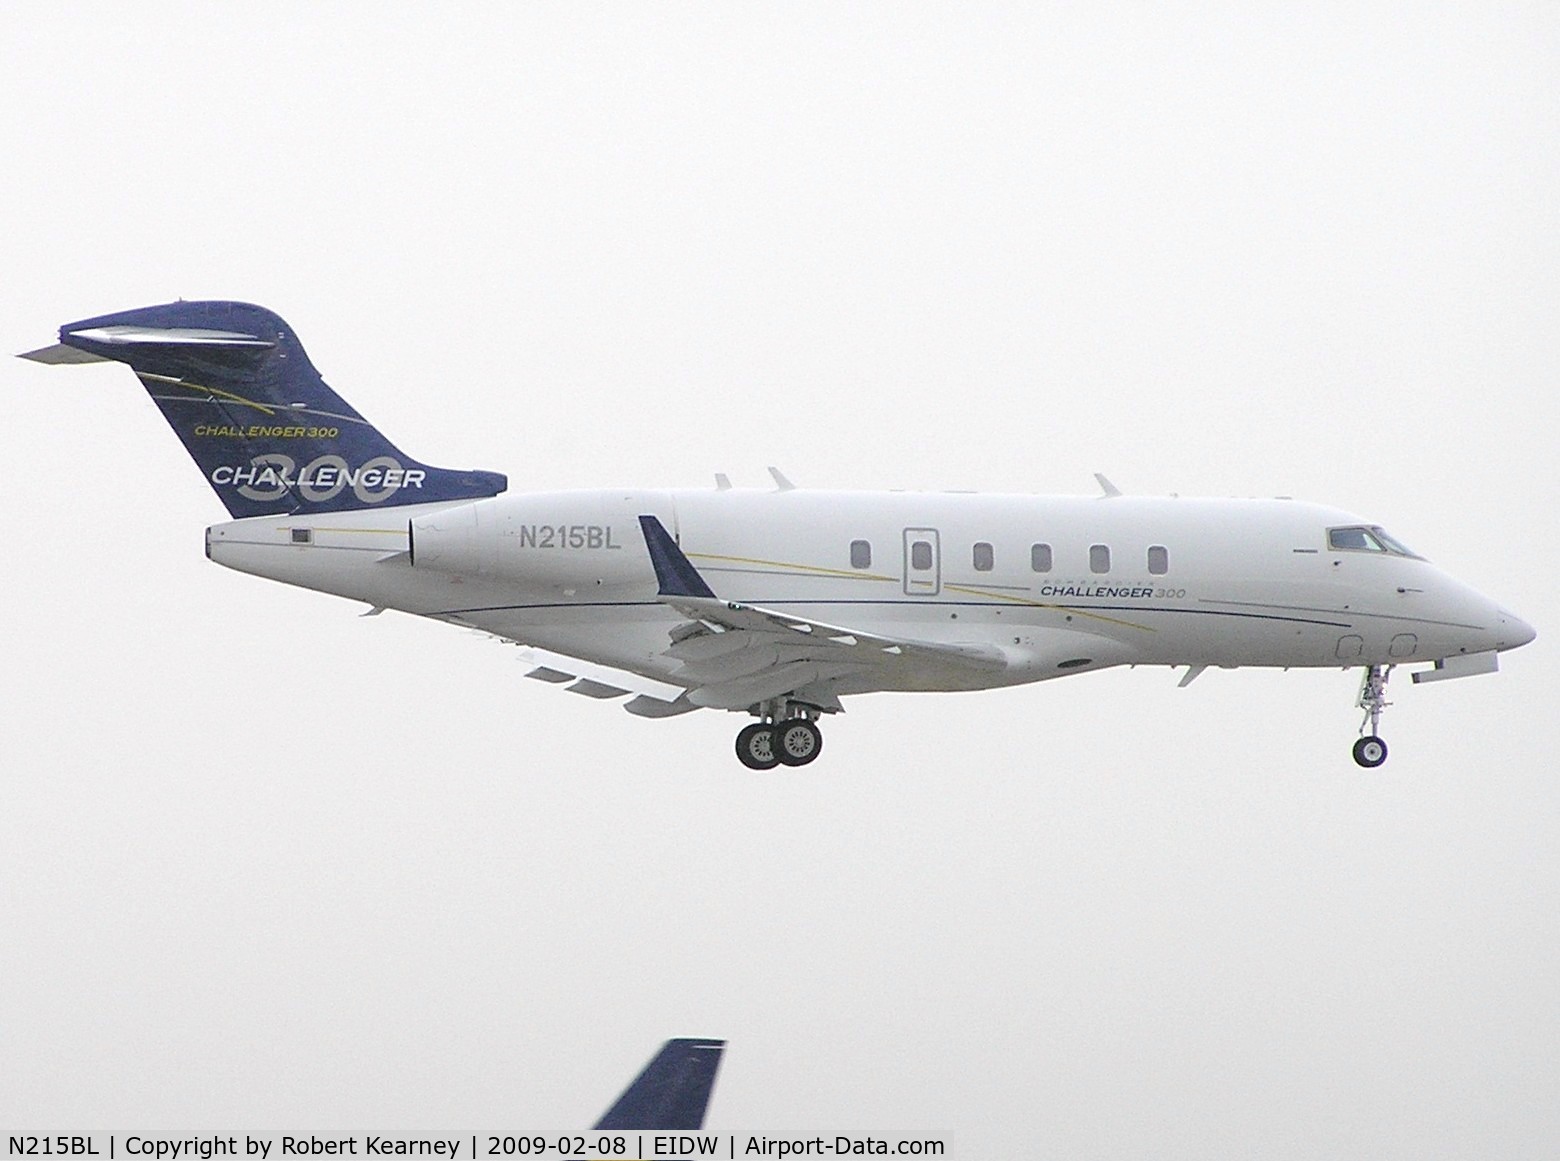 N215BL, 2008 Bombardier Challenger 300 (BD-100-1A10) C/N 20215, Challenger300 on short finals on r/w 10